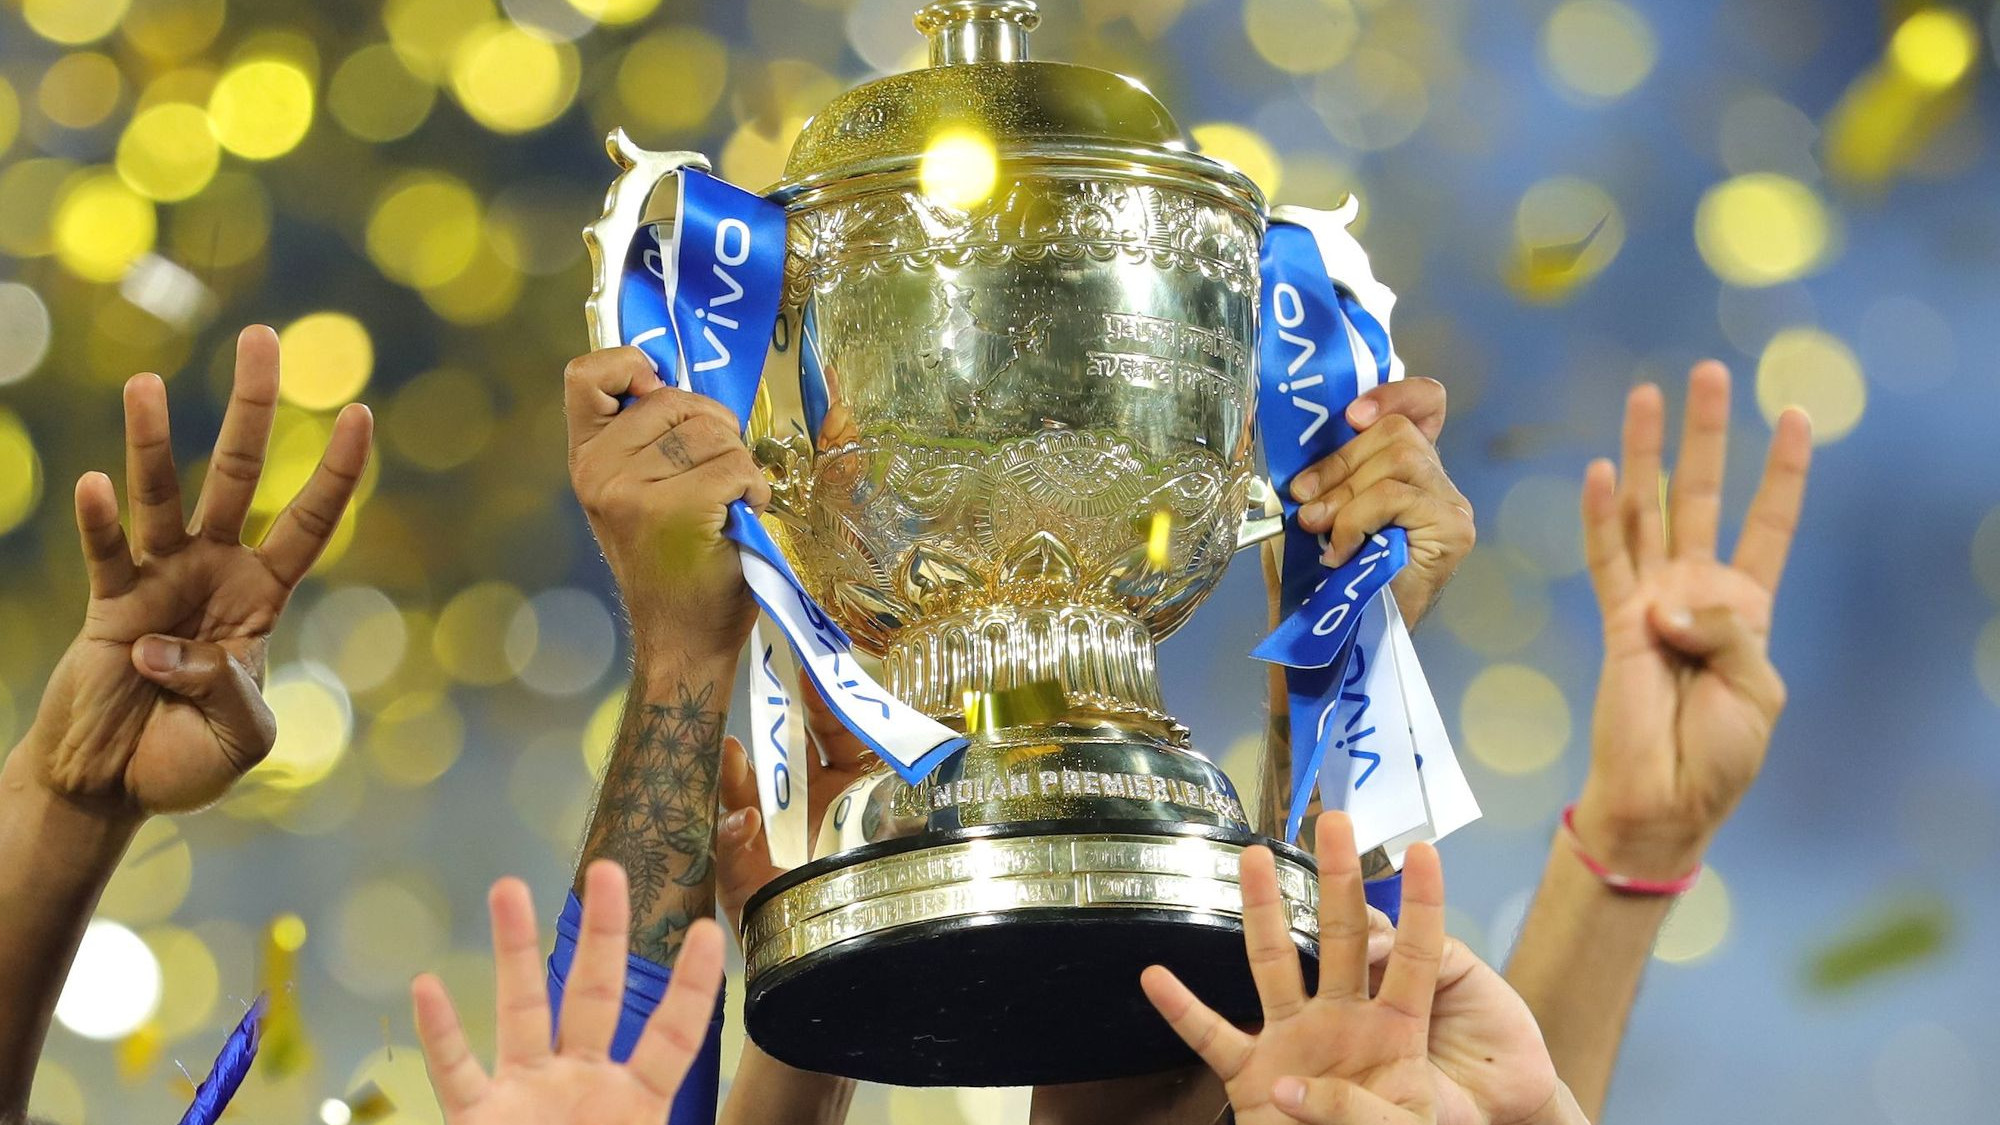 IPL 2021: IPL 14 schedule announced; matches to be played behind closed doors initially